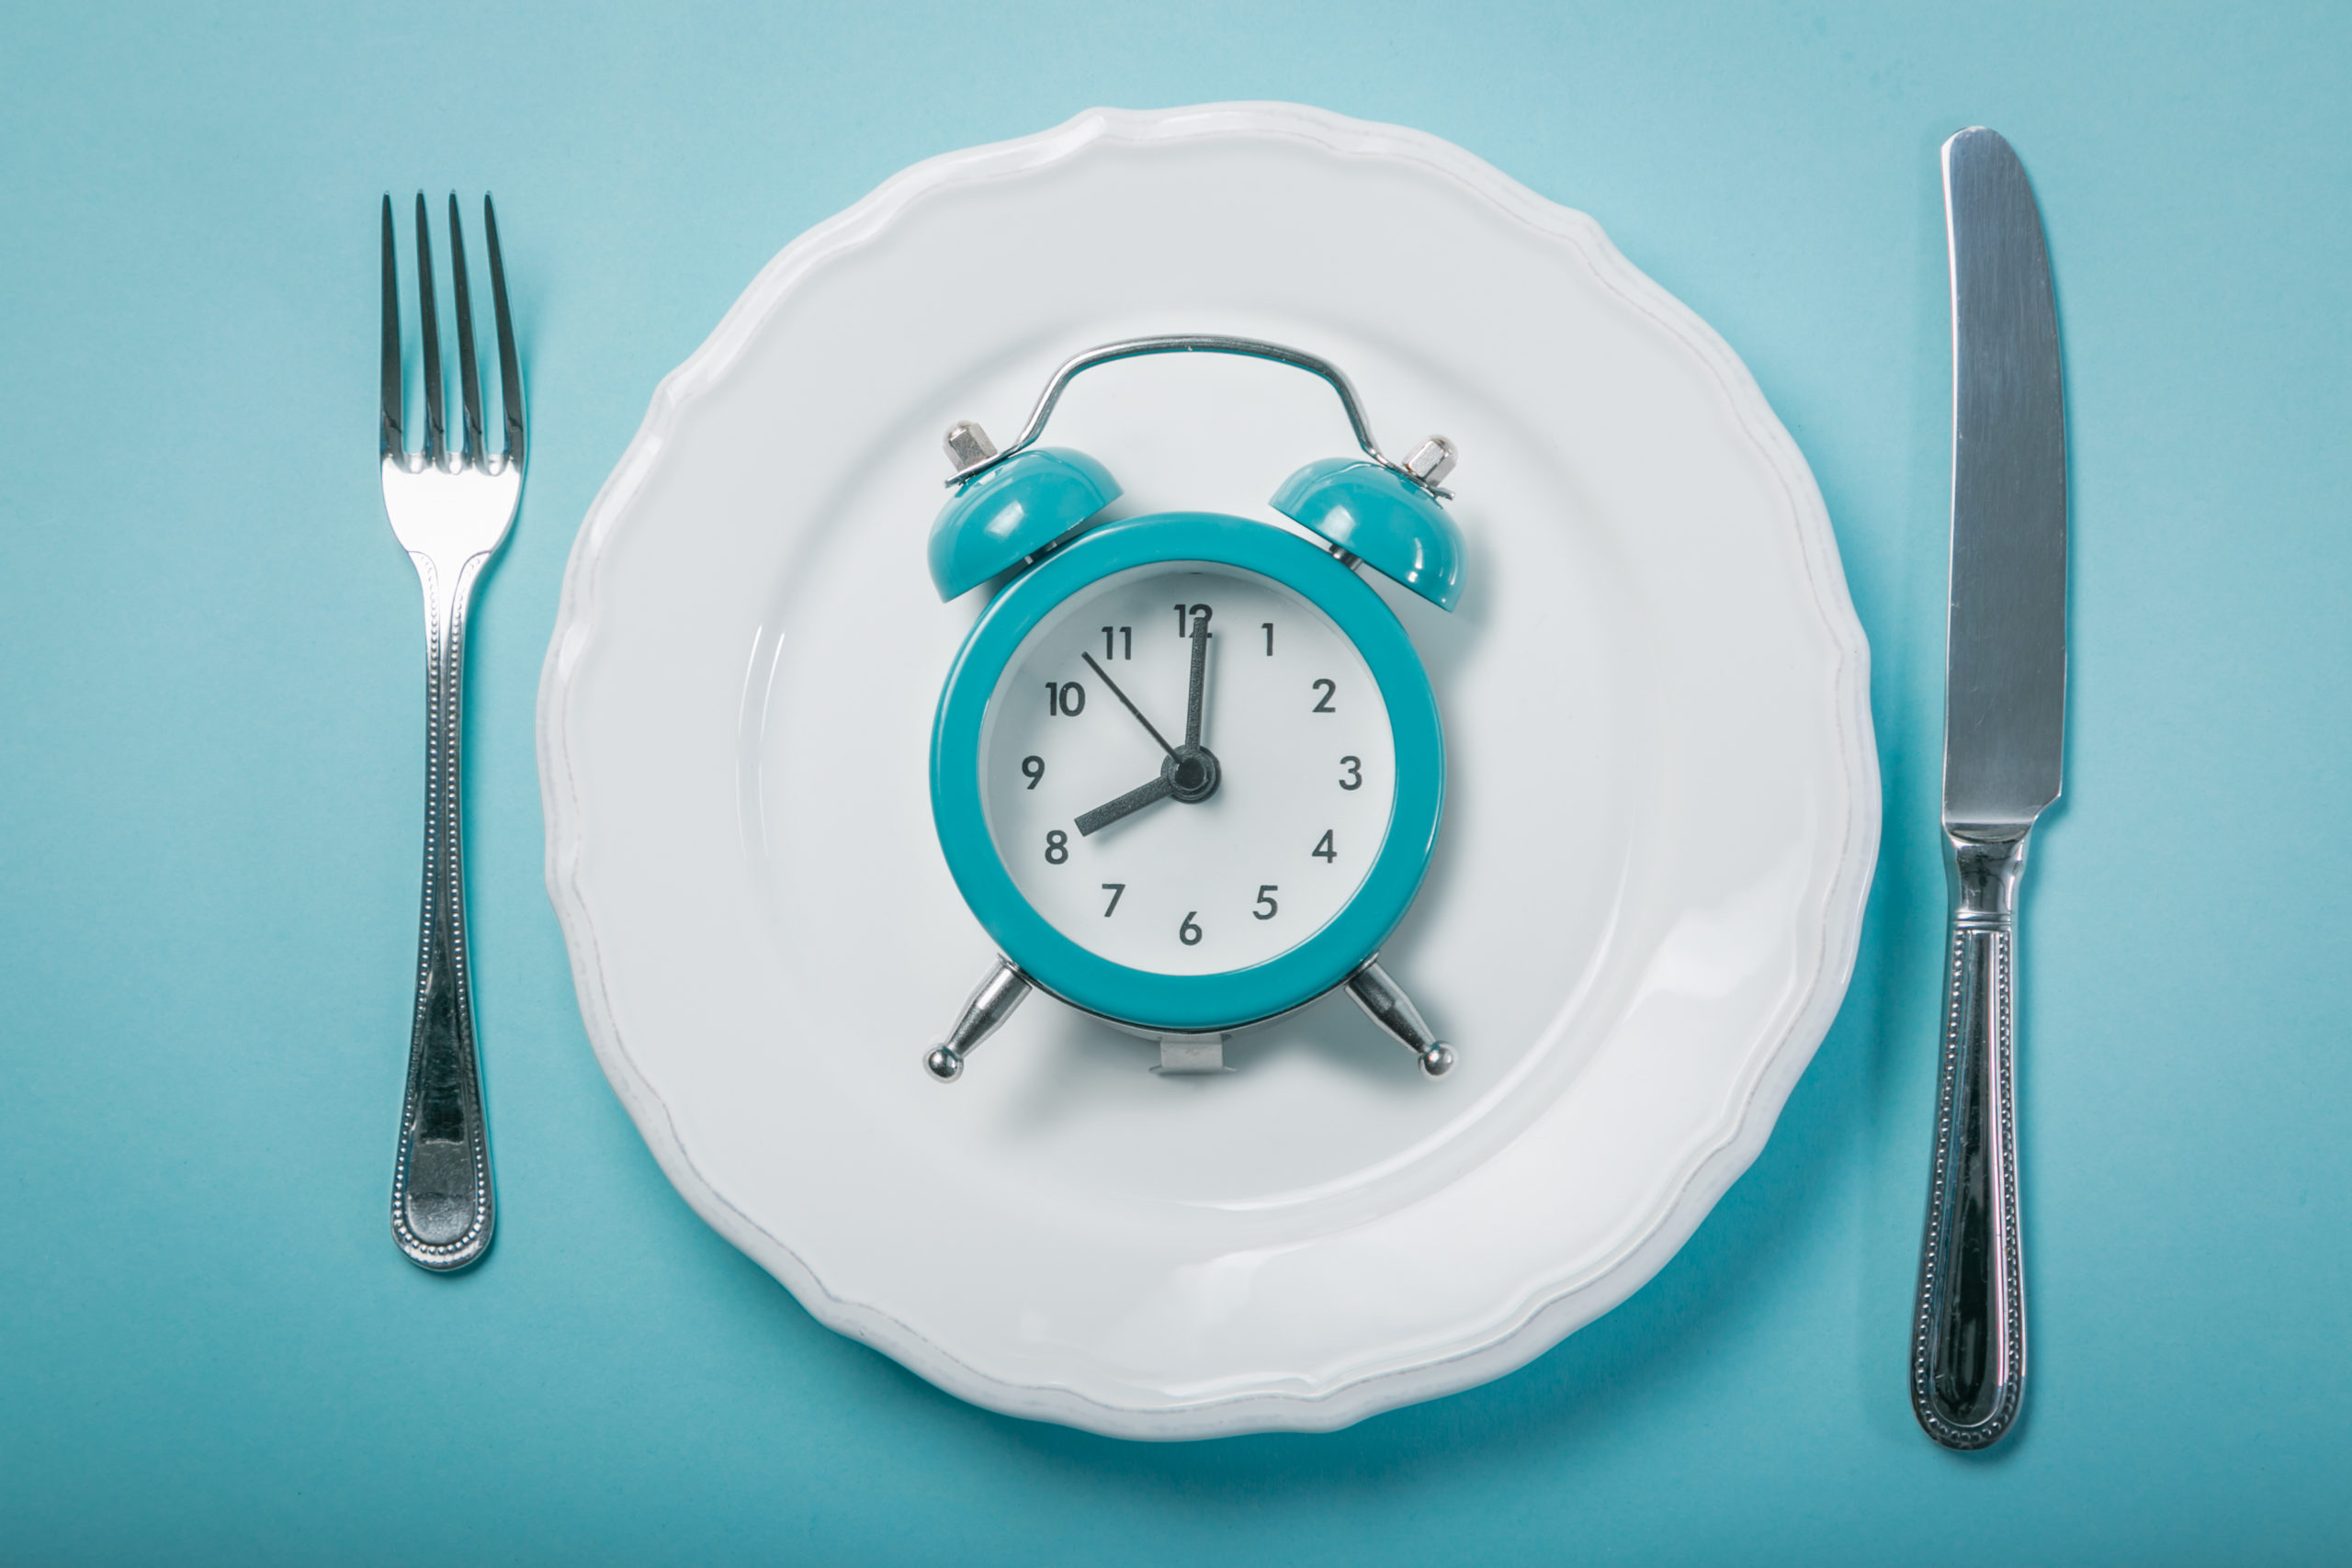 Clock on plate diet rules